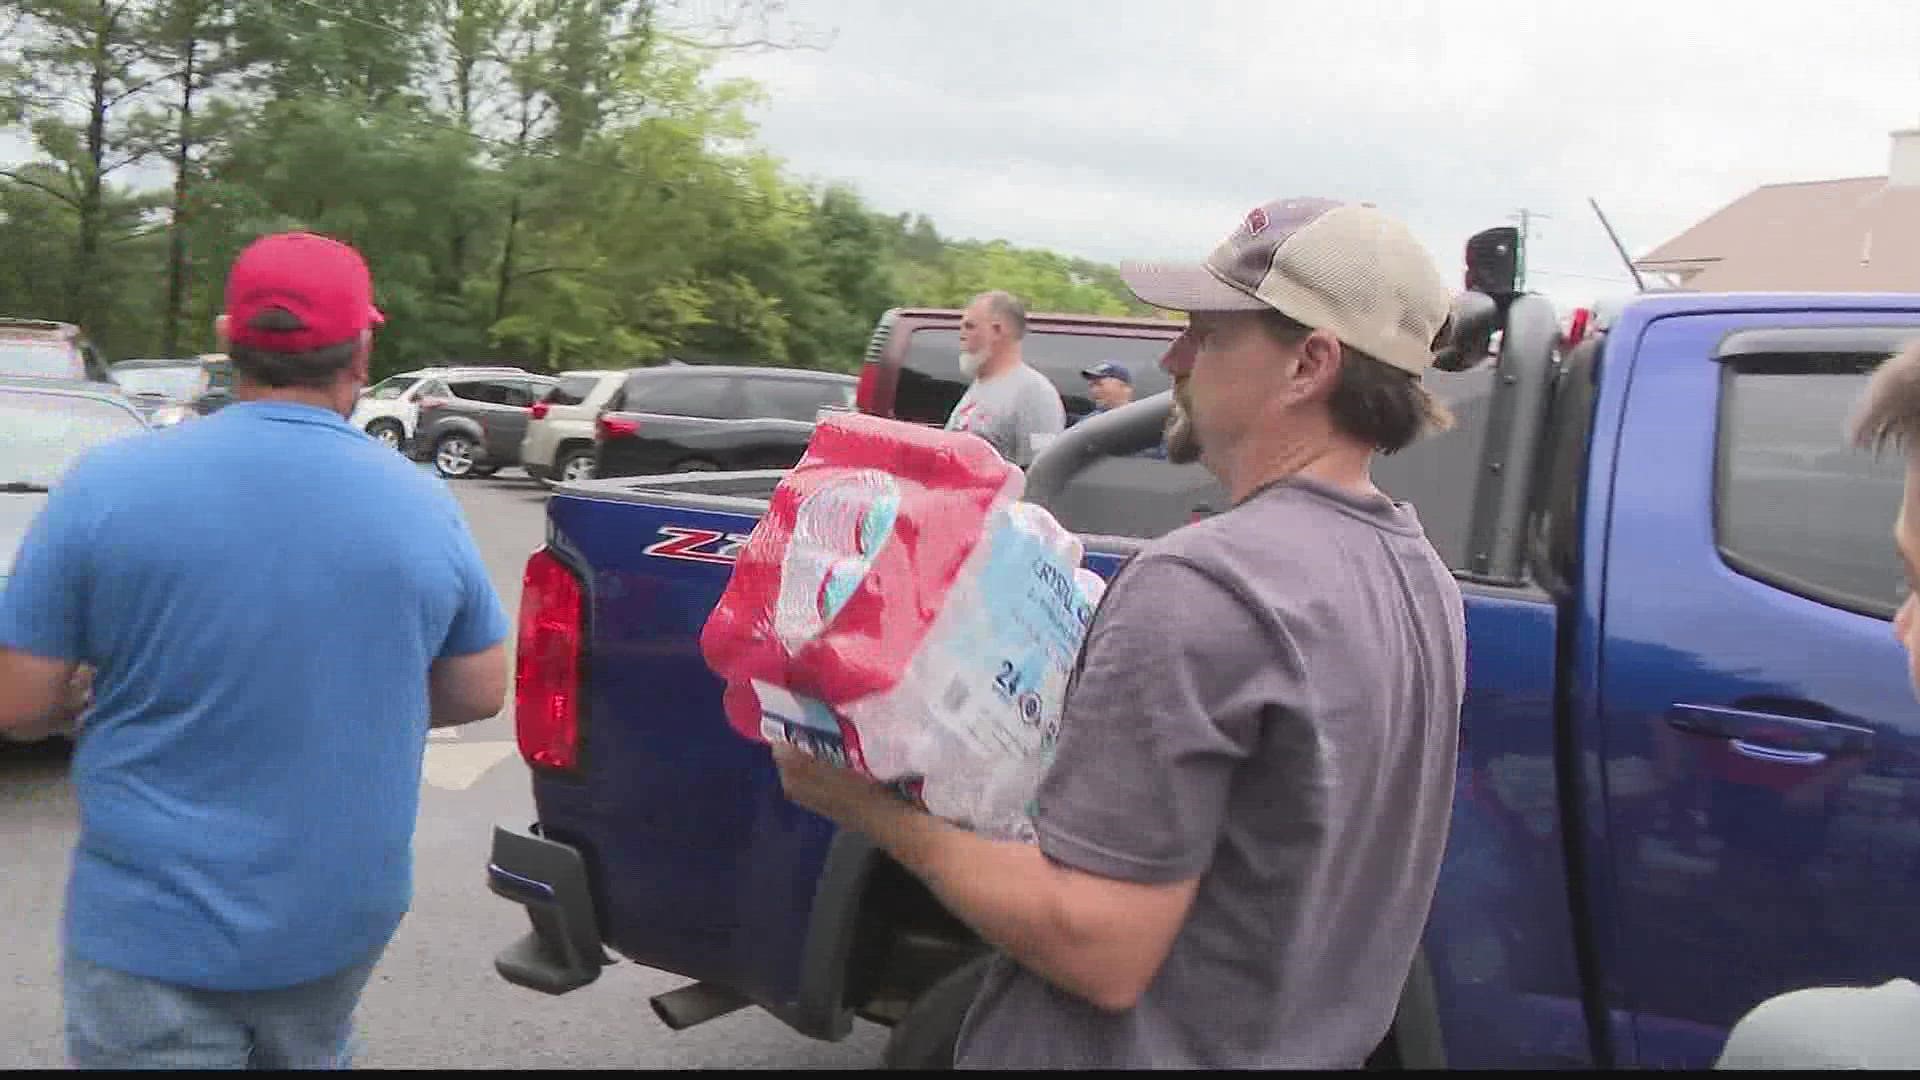 Water donations have been coming in from other states. There are also deliveries being made to the homes.